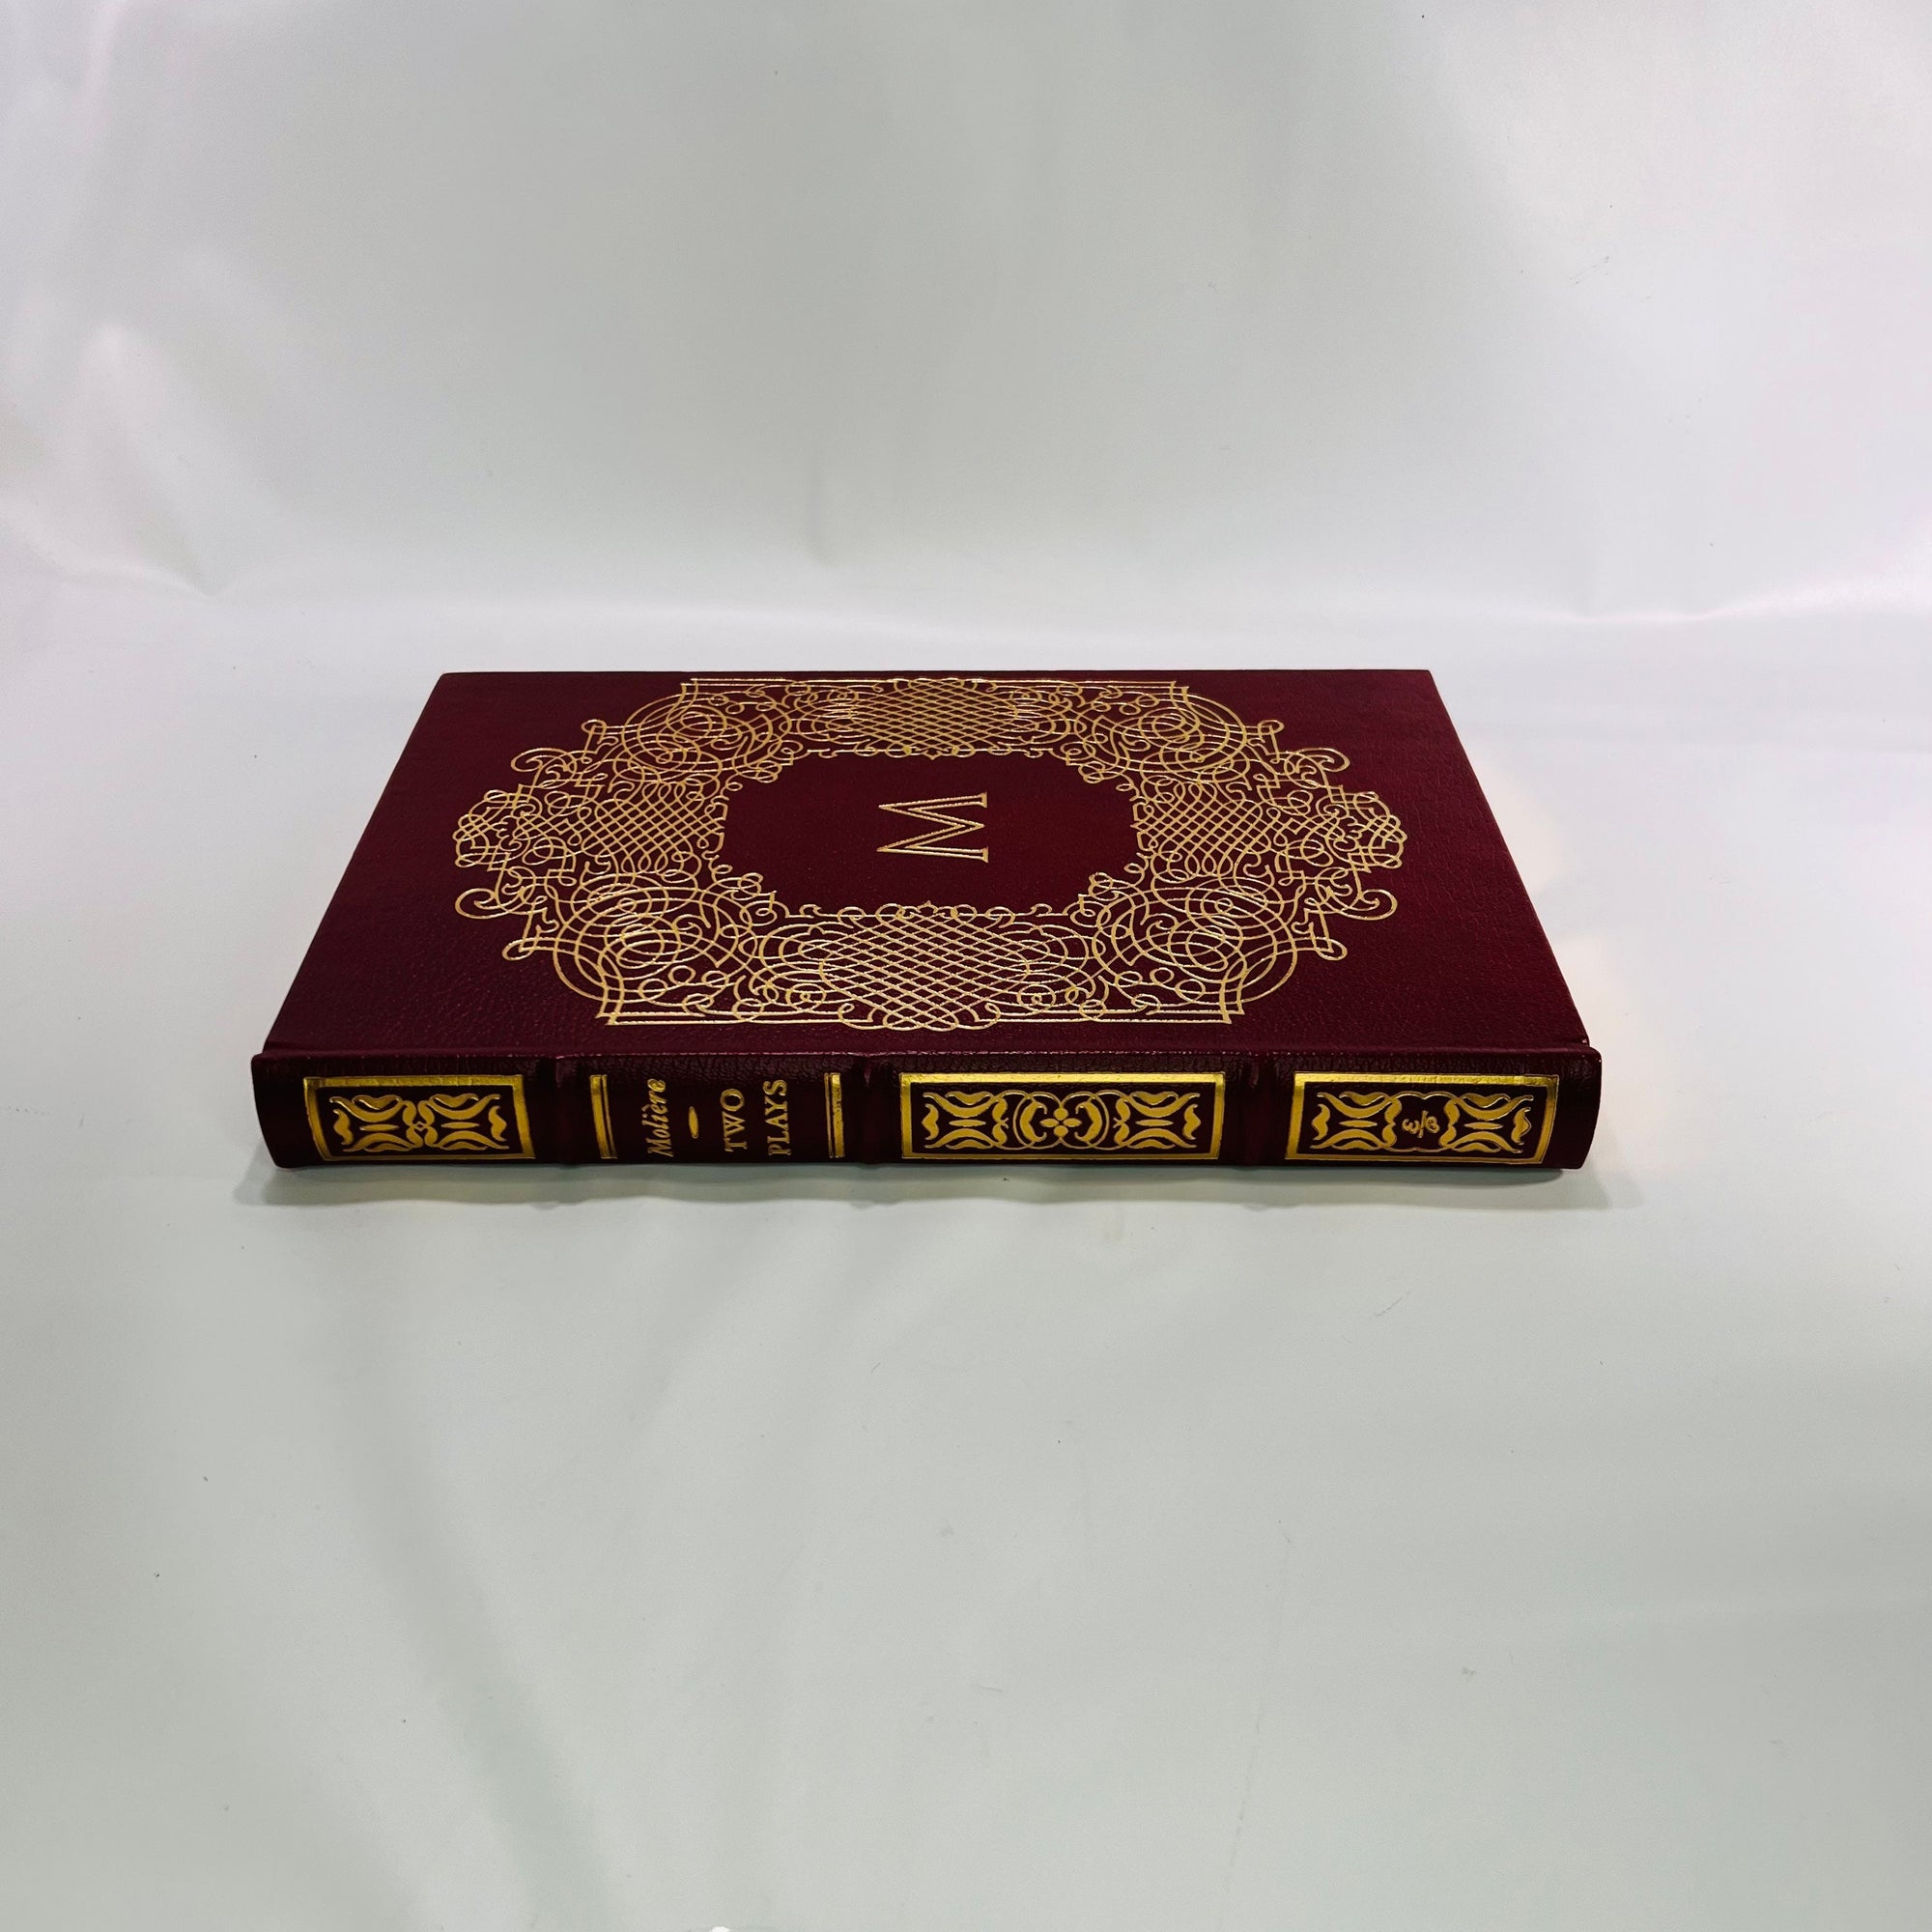 Tartuffe & the Would Be Gentleman 2 Plays by Moliere 1980 Vintage Classic Easton Press 100 Greatest Book Collection Leather Bound Book